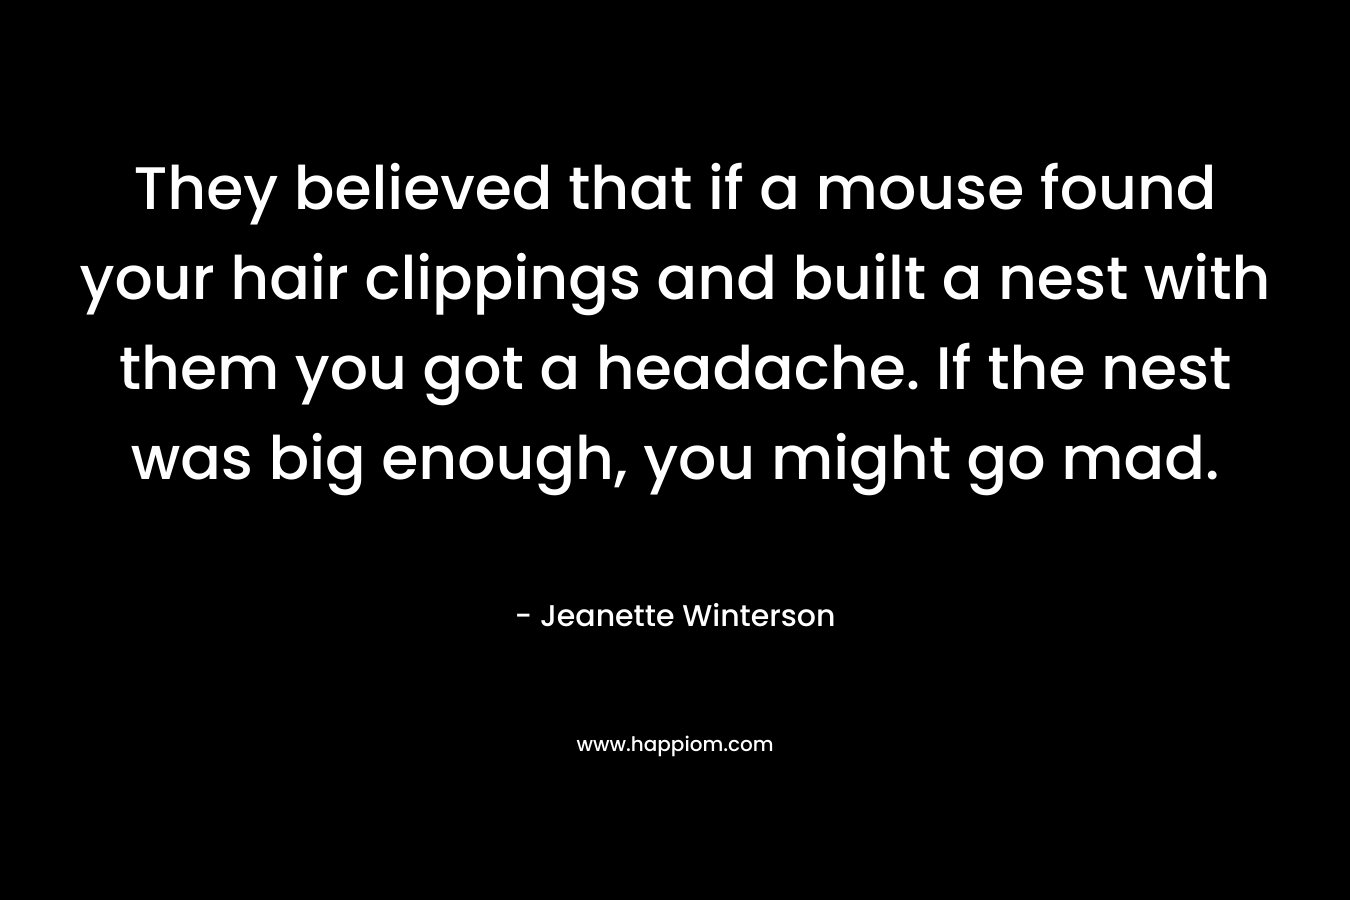 They believed that if a mouse found your hair clippings and built a nest with them you got a headache. If the nest was big enough, you might go mad. – Jeanette Winterson